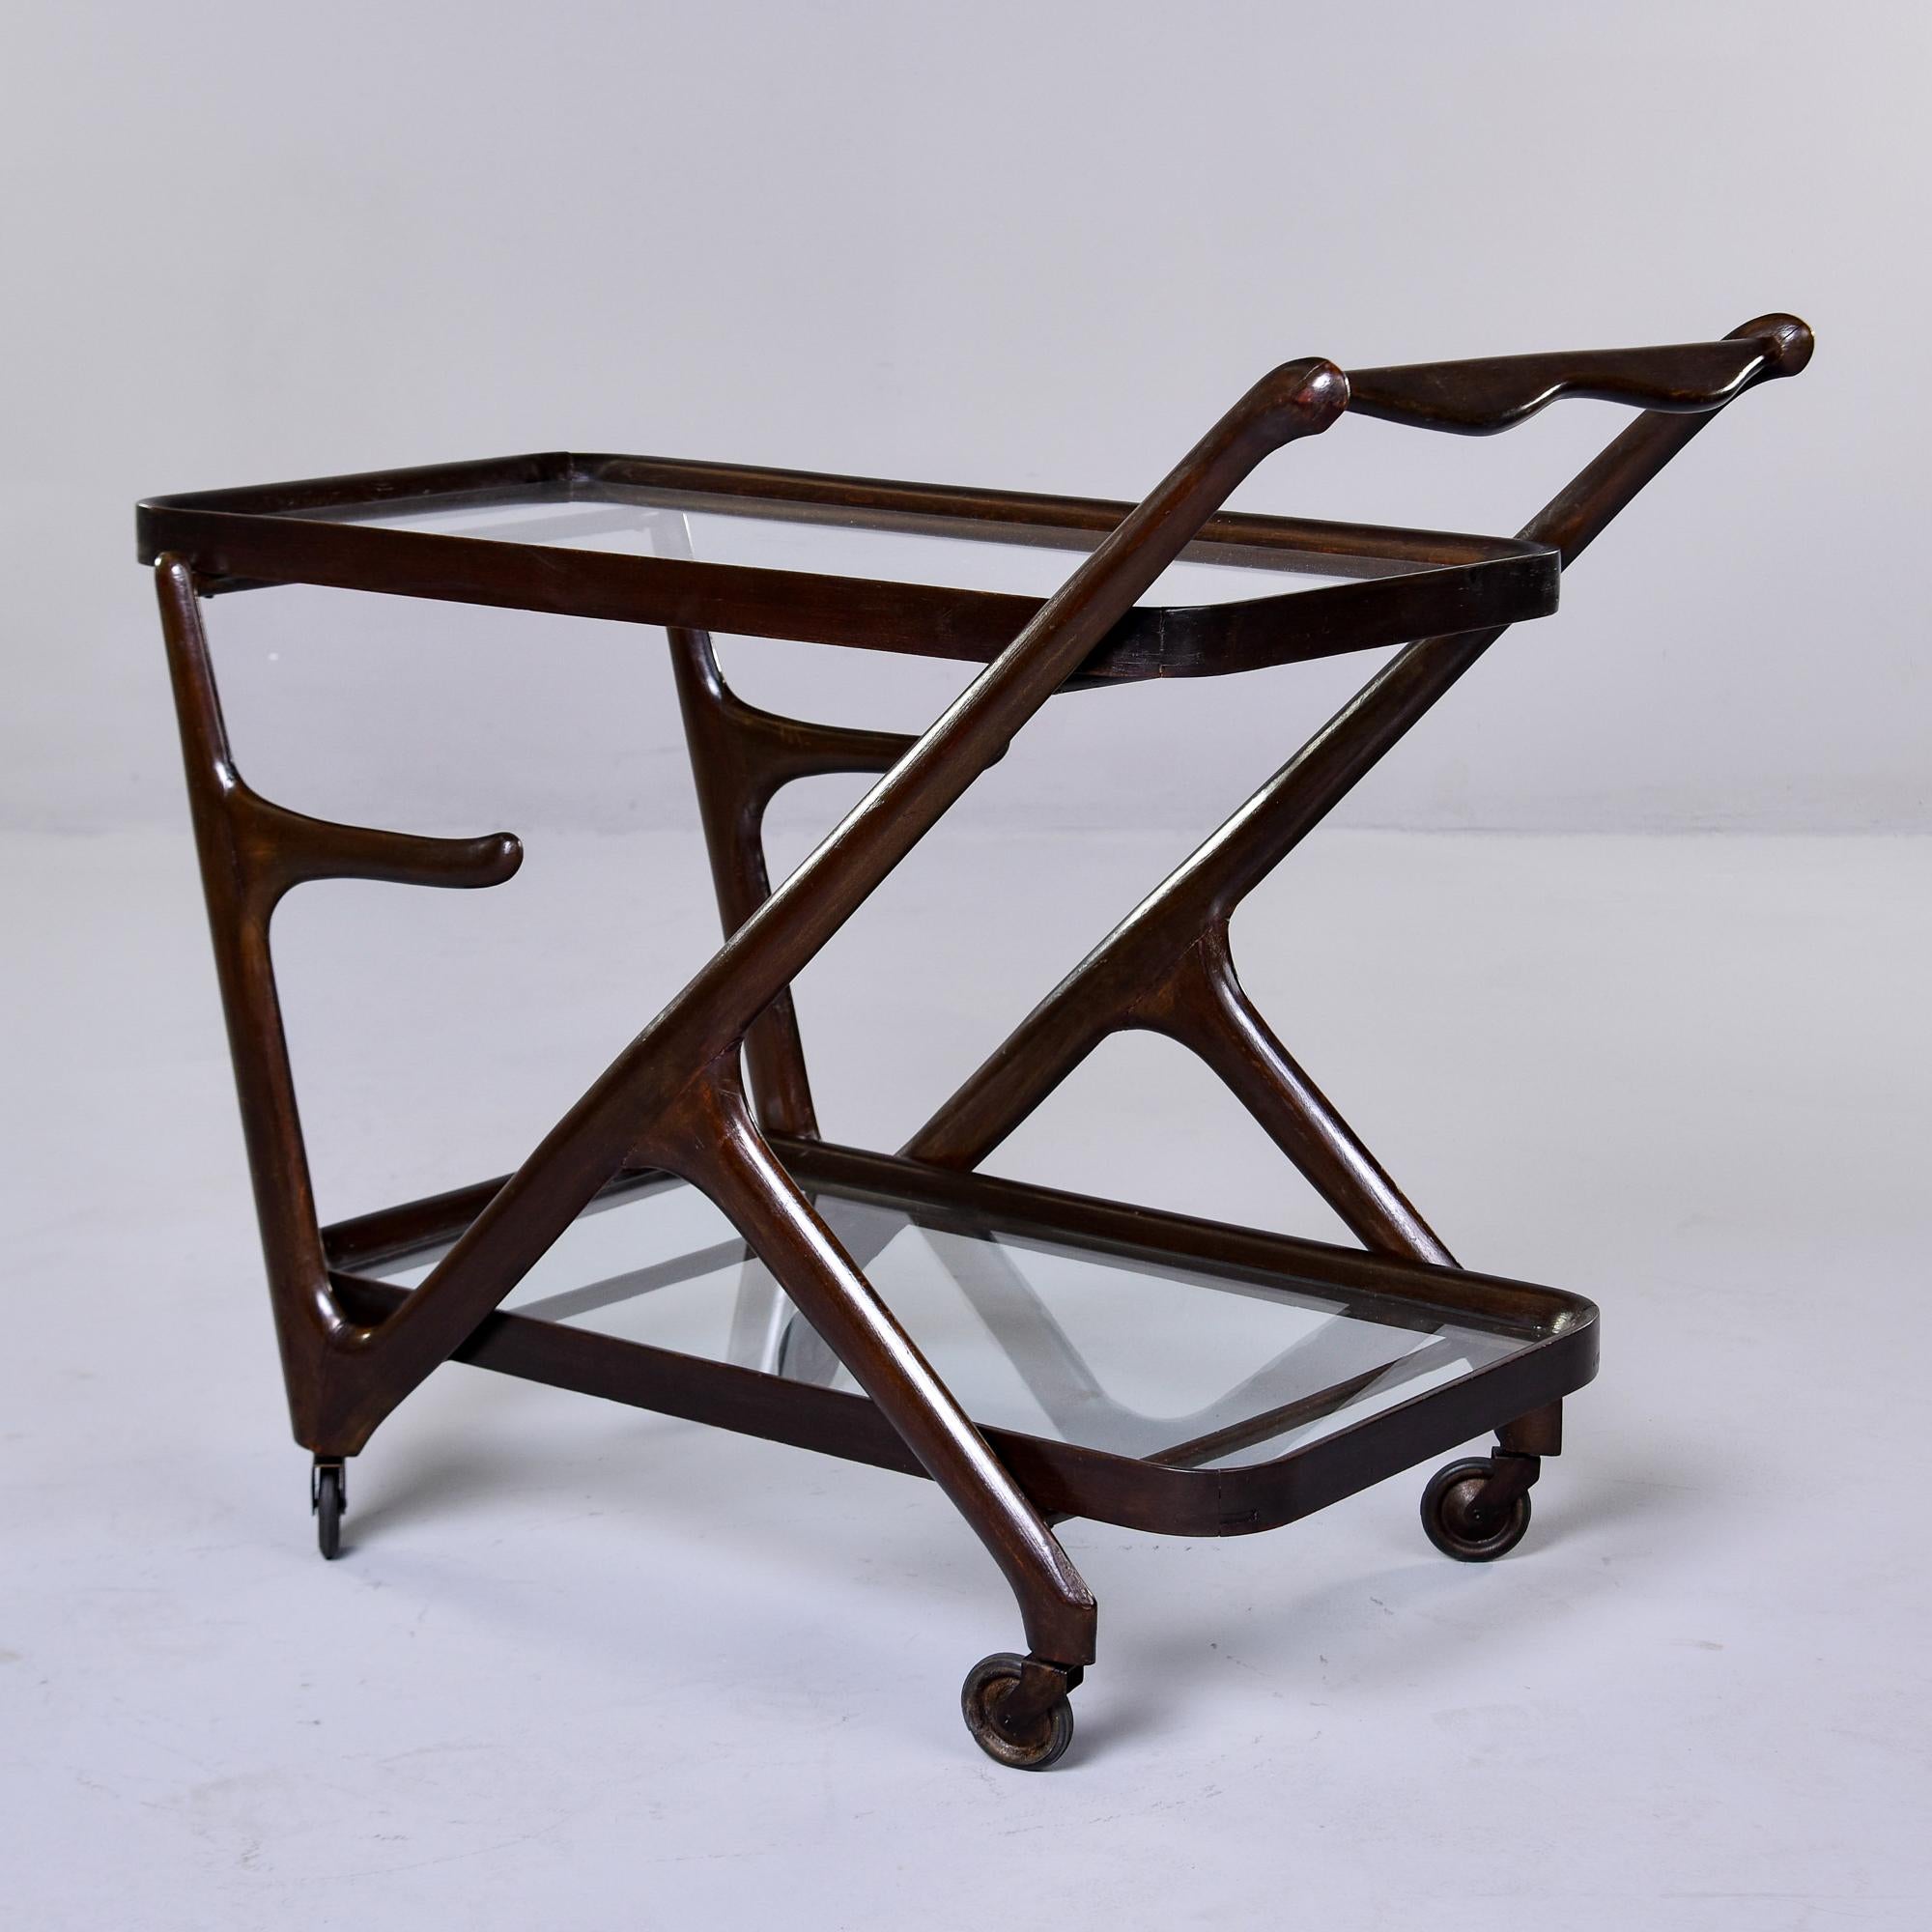 This modernist style bar cart was designed by Cesare Lacca for Cassina. It has a dark mahogany frame, two glass shelves and dates from the 1950s. Original metal and black rubber casters, angled frame and two tiers of glass insert shelves. 

Overall